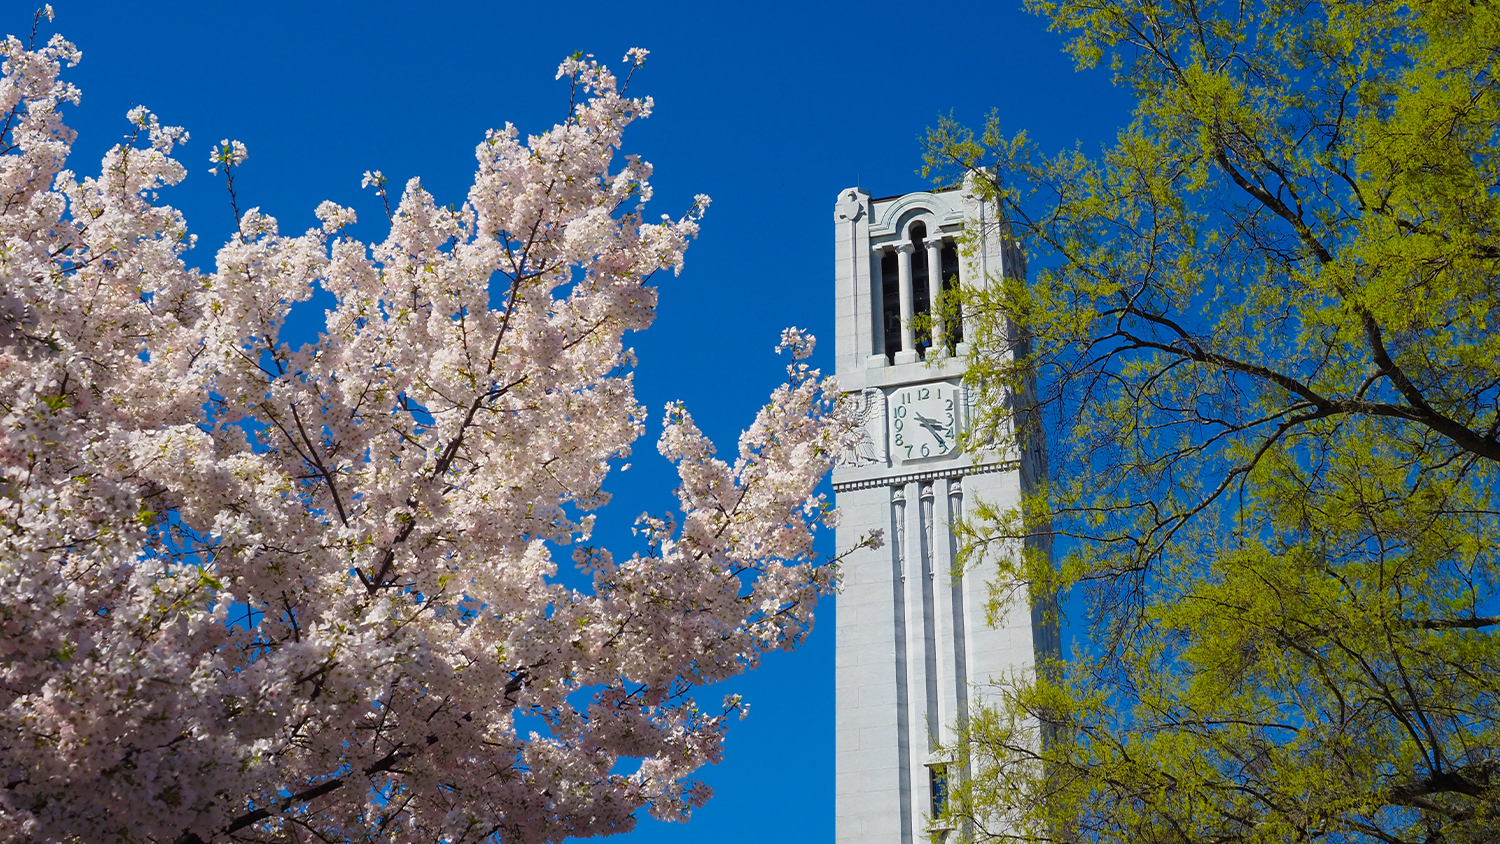 Pink spring flowers can be seen next to the belltower on a nice sunny spring day.